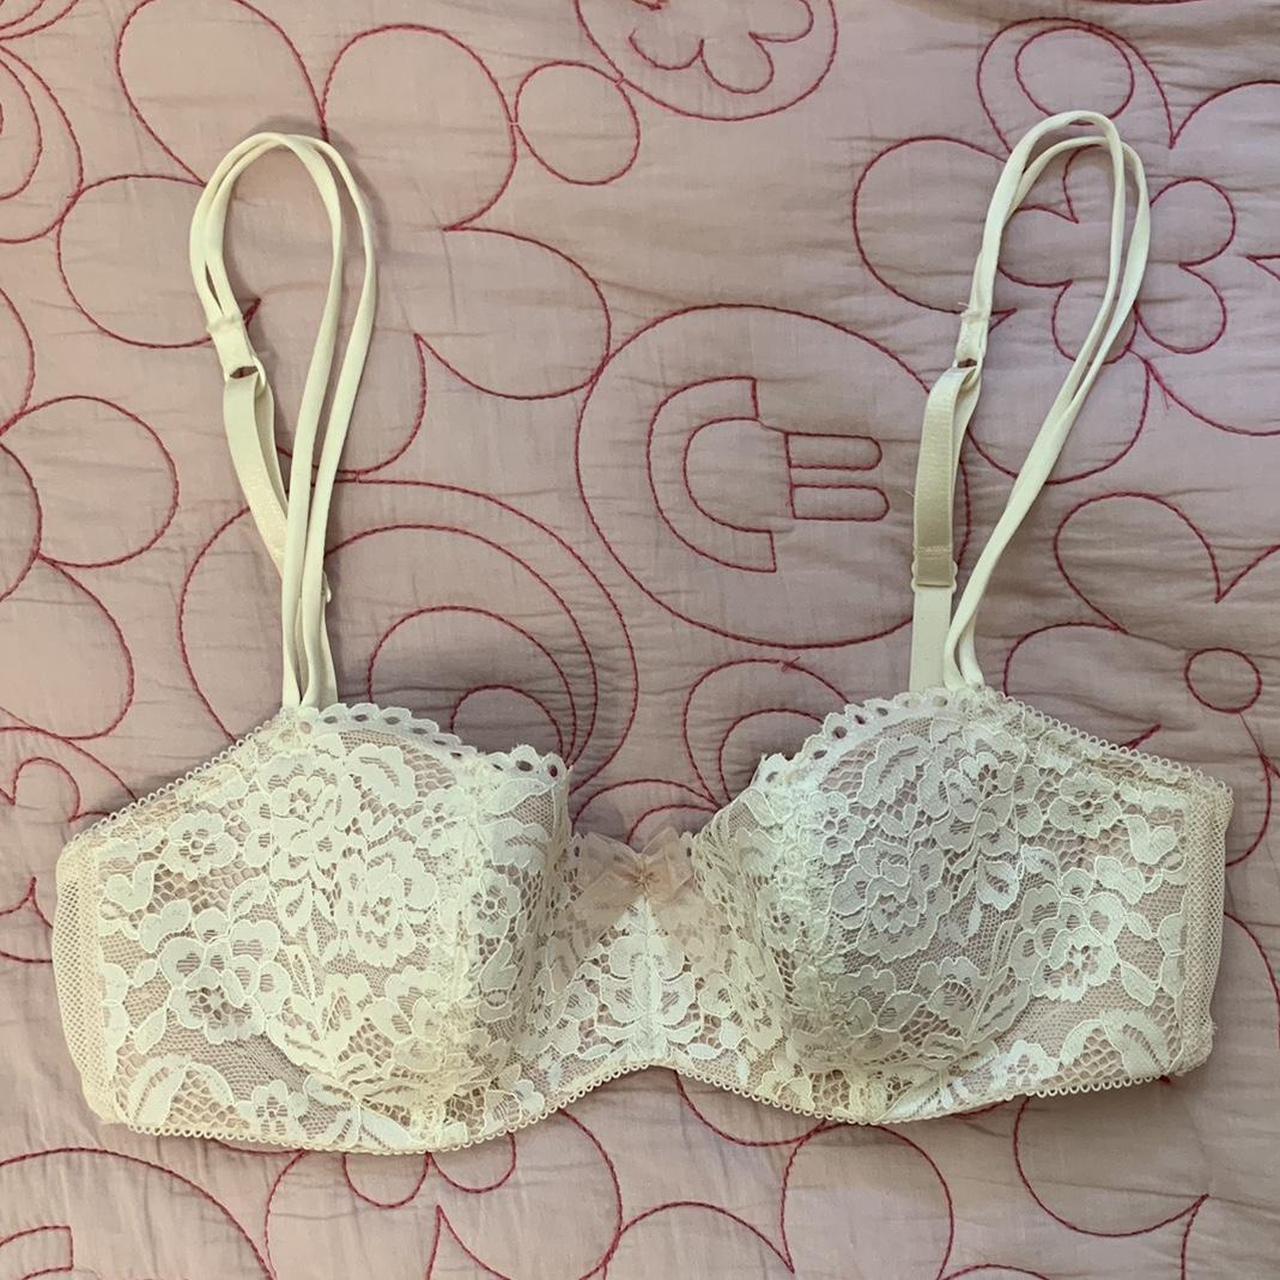 bright red cut out lace bra with diamond+bow accent - Depop